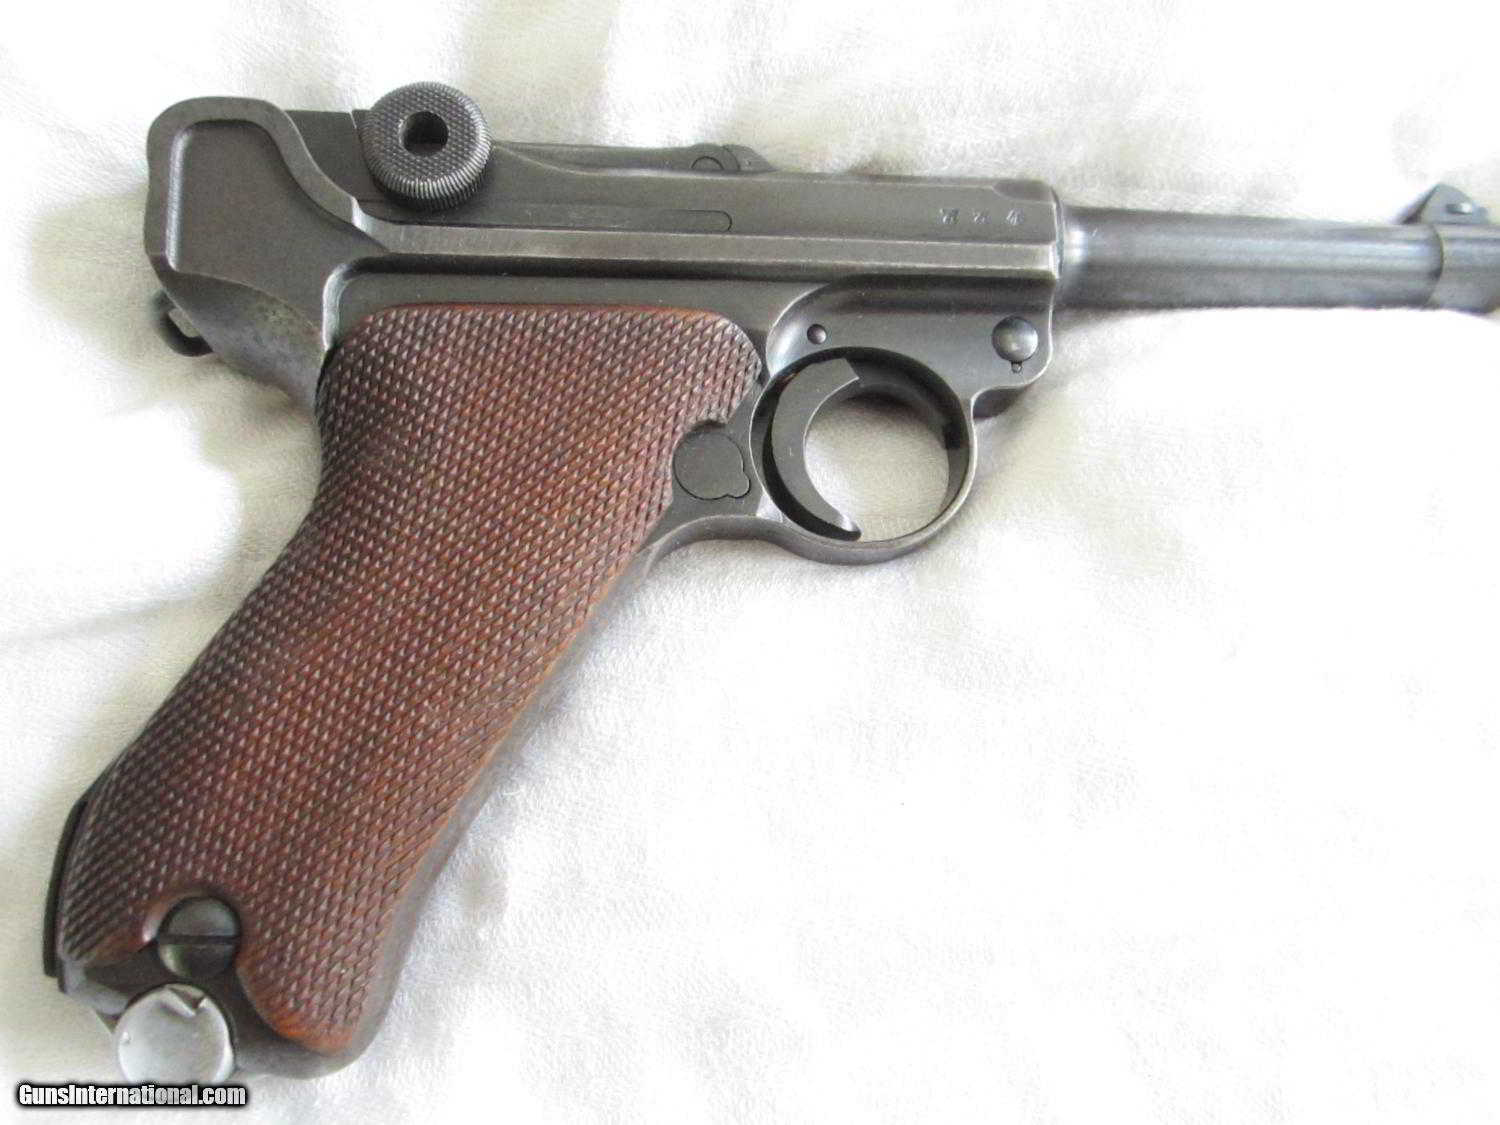 MAUSER WW2 German LUGER dated 1938 for sale